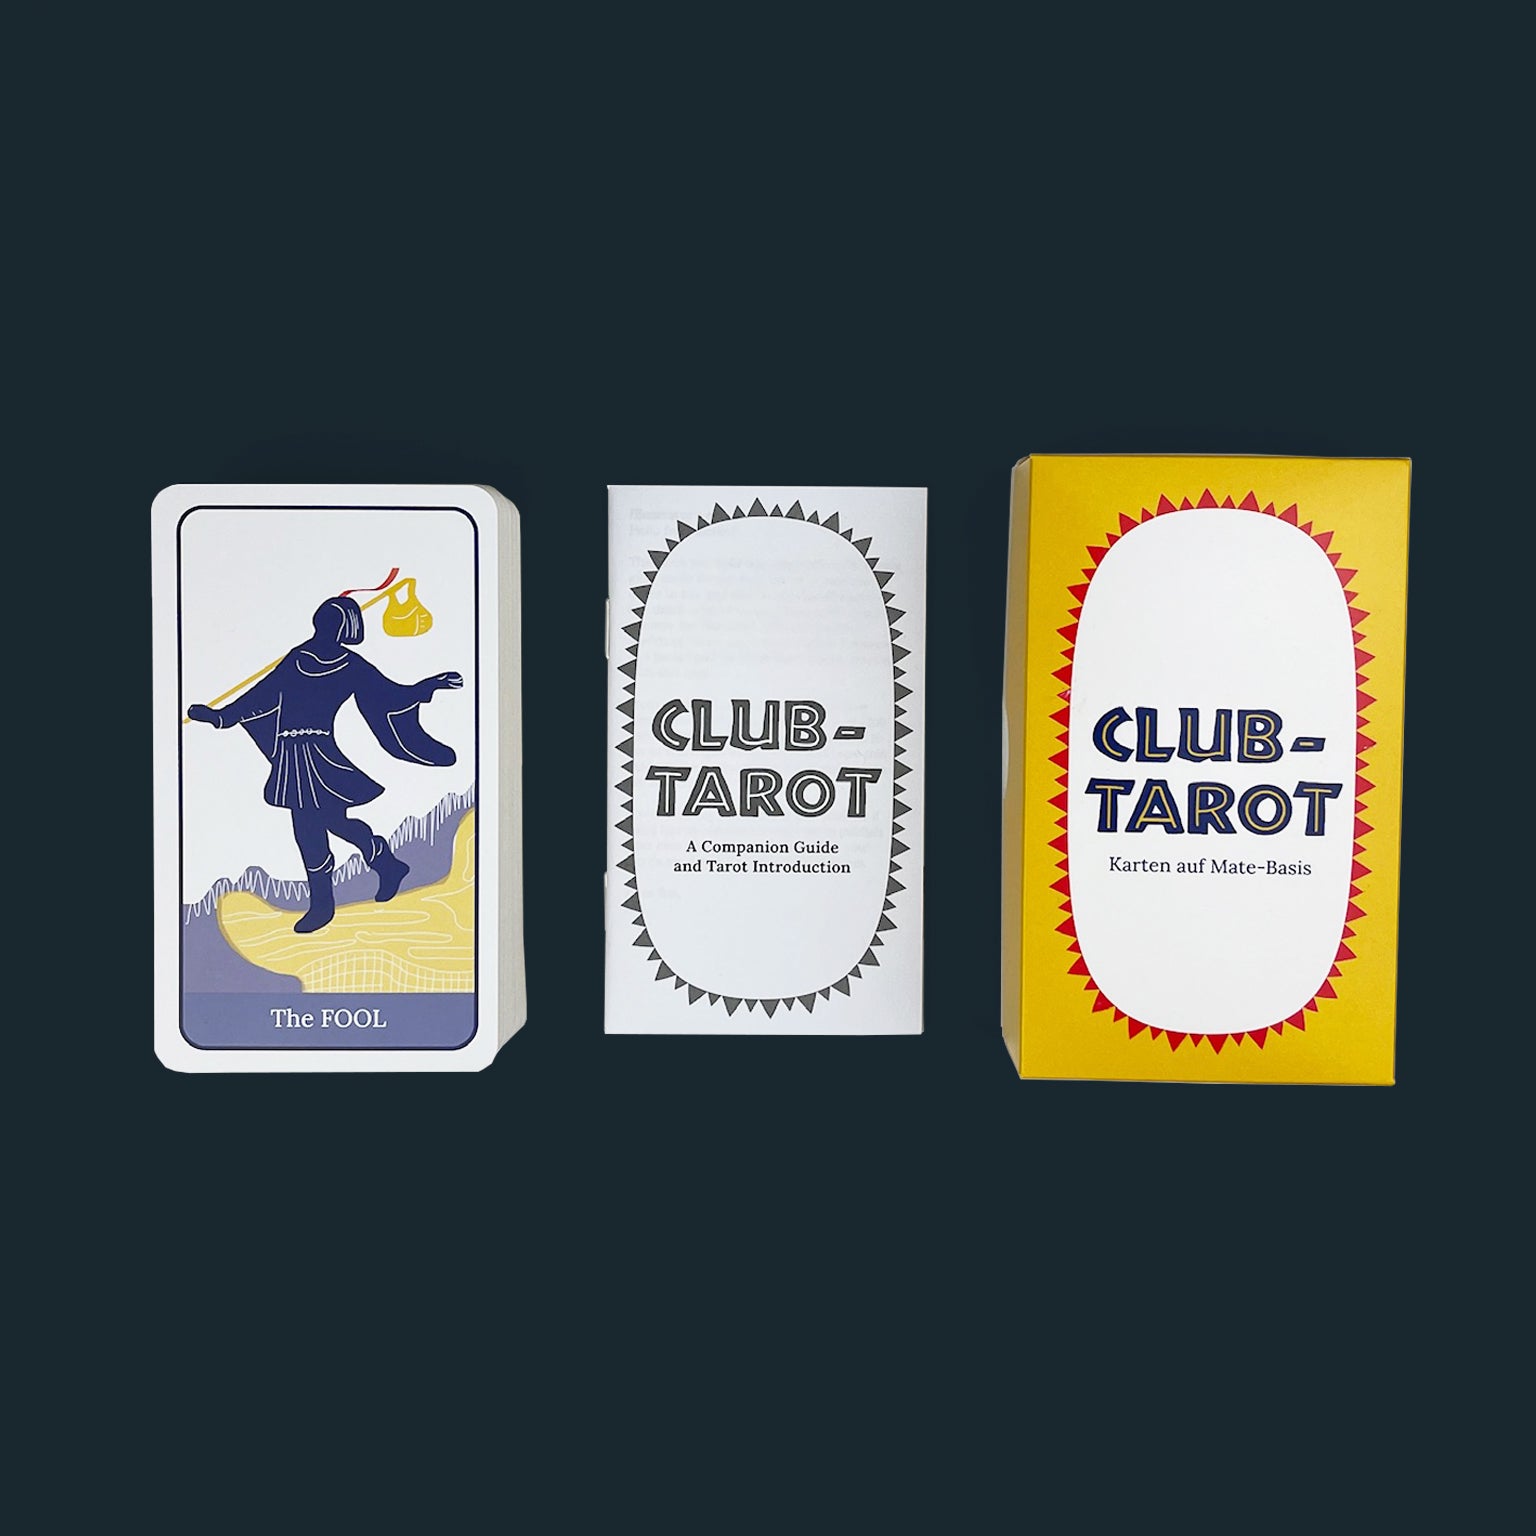 Deck of Tarot Cards in the style of Club Mate on a dark green background. The box is yellow and red, the guidebook is in black and white, and on the left is a pile of Tarot cards with the Fool on top.